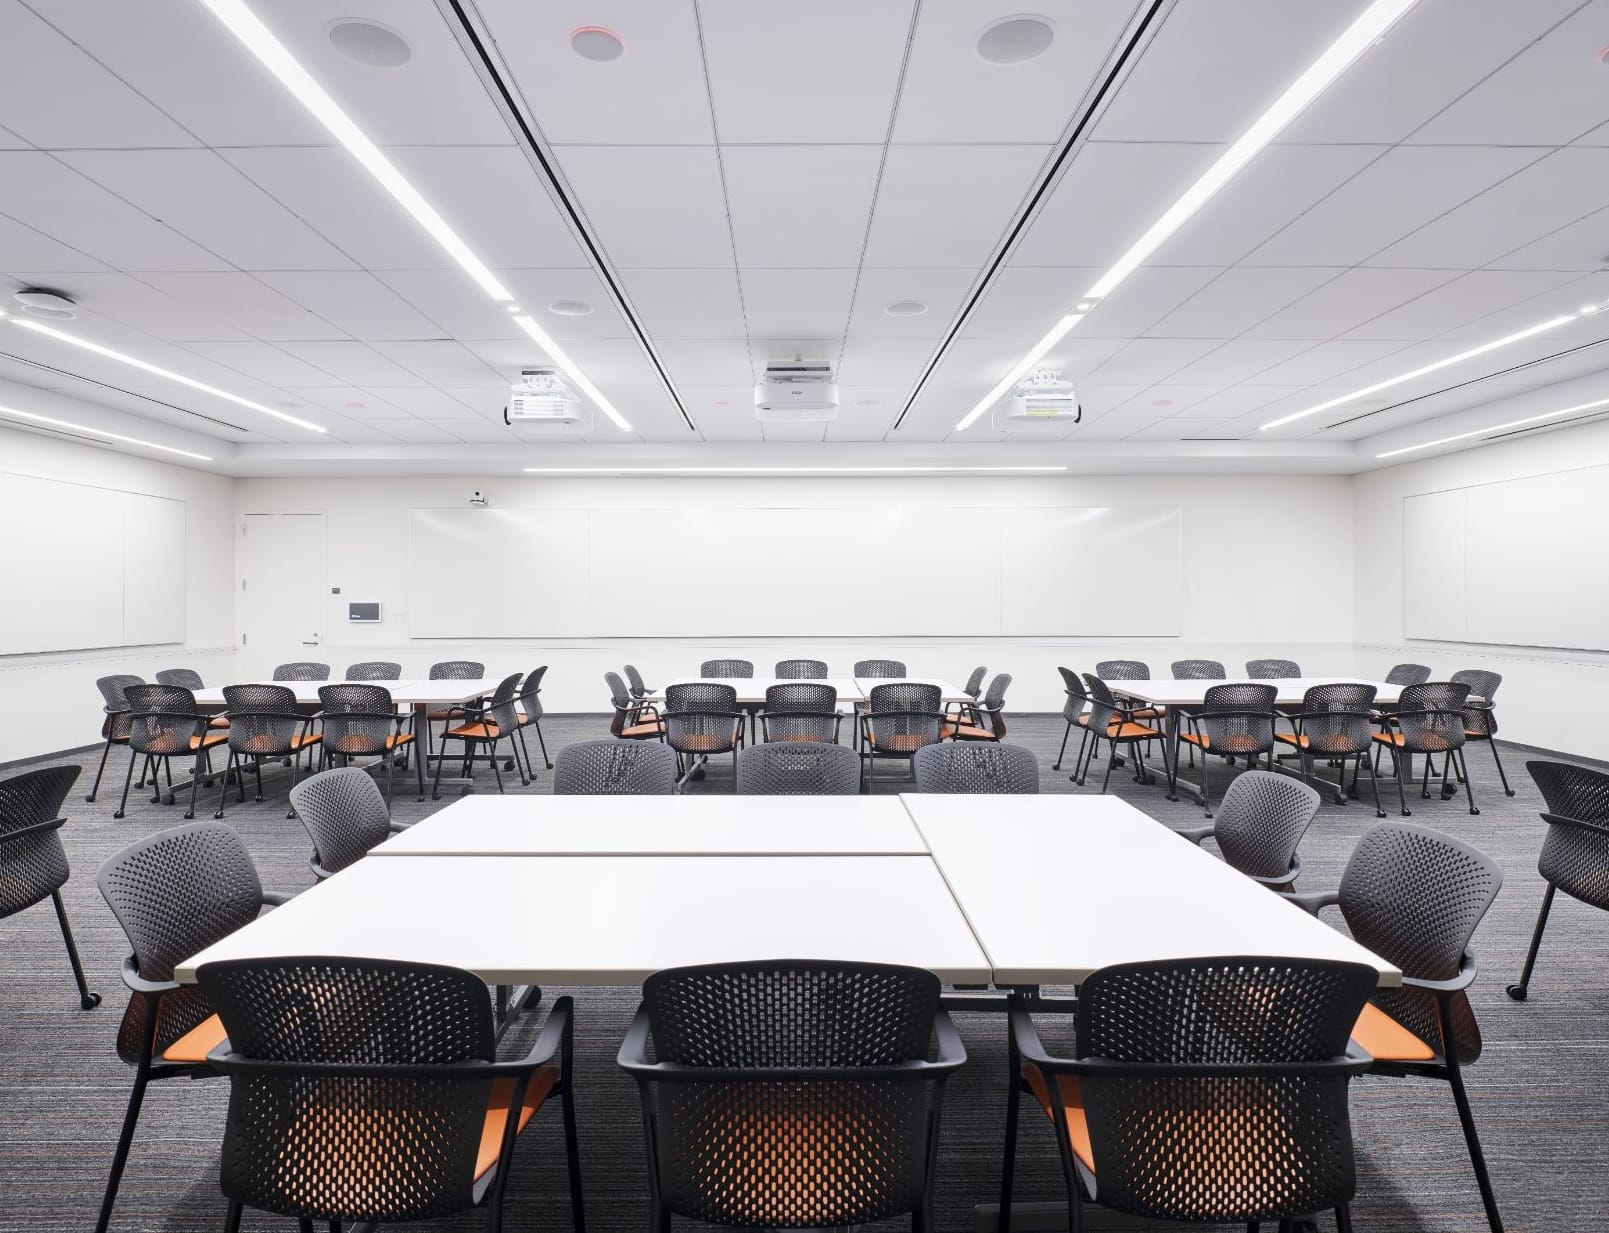 A modern classroom with whiteboards on multiple walls and clusters of moveable and reconfigurable tables and chairs.